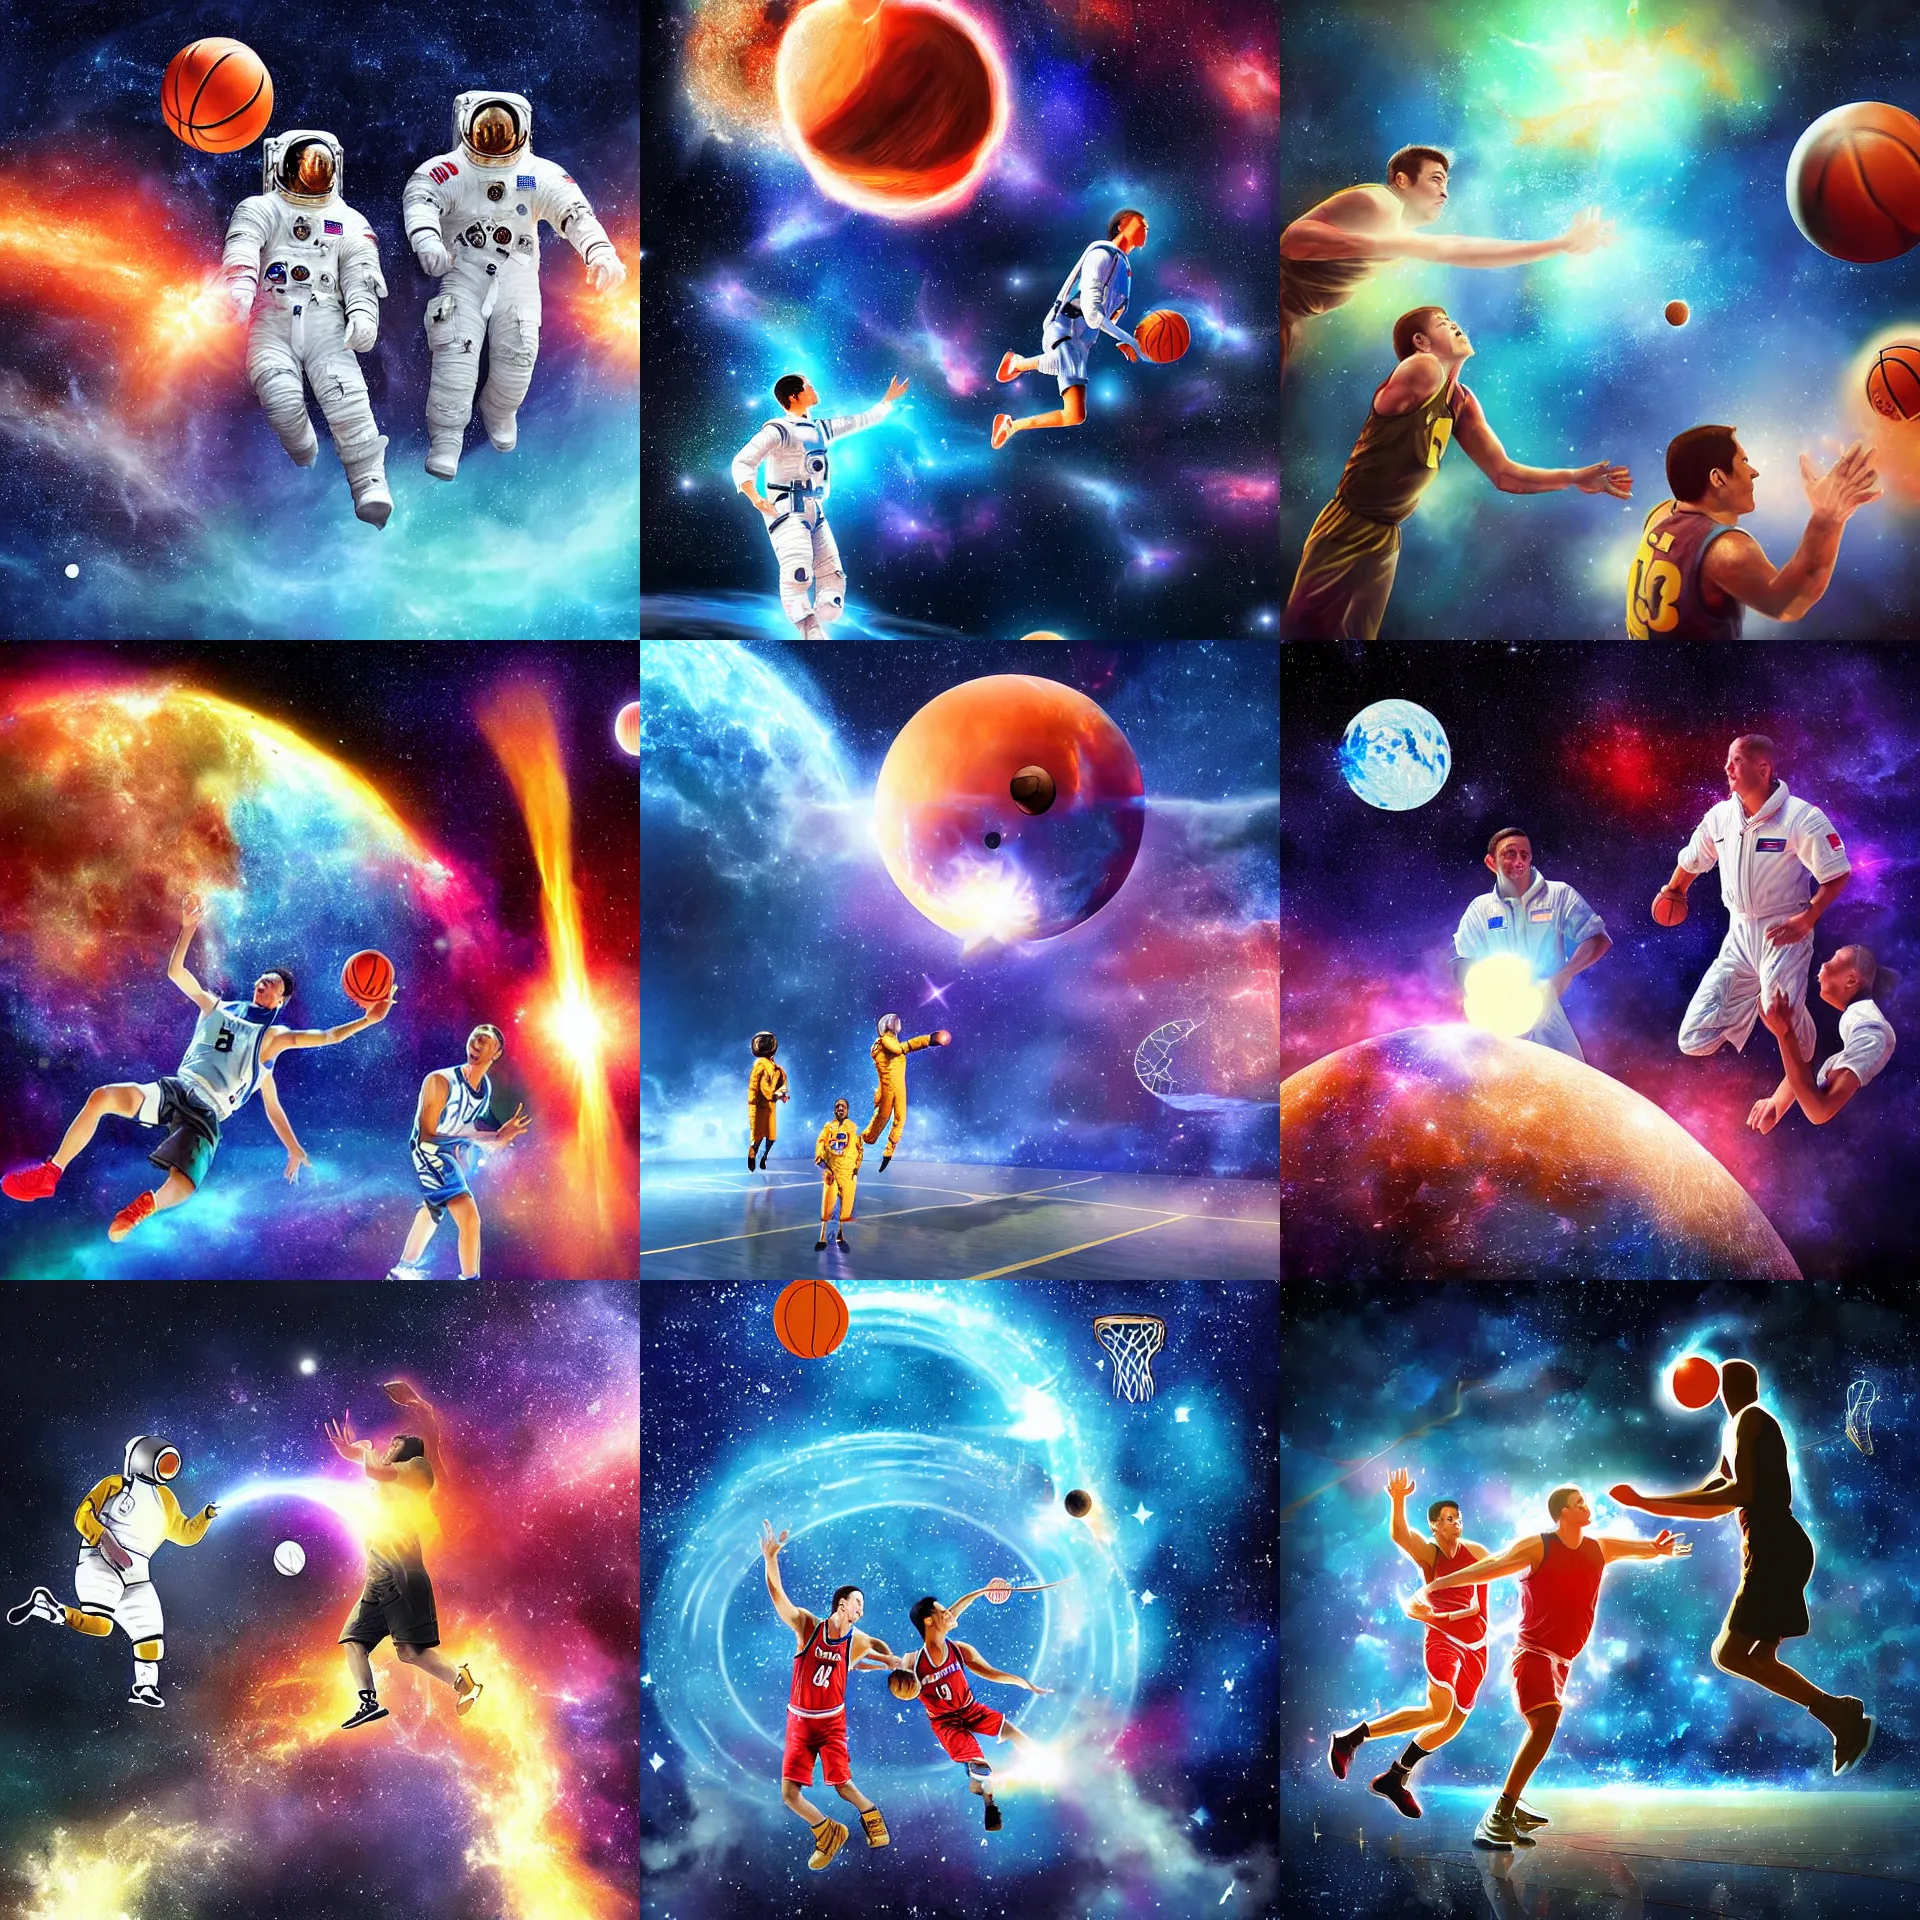 Prompt: Two astronauts playing basketball with the moon as the ball, a colorful nebula explosion in the background, digital art